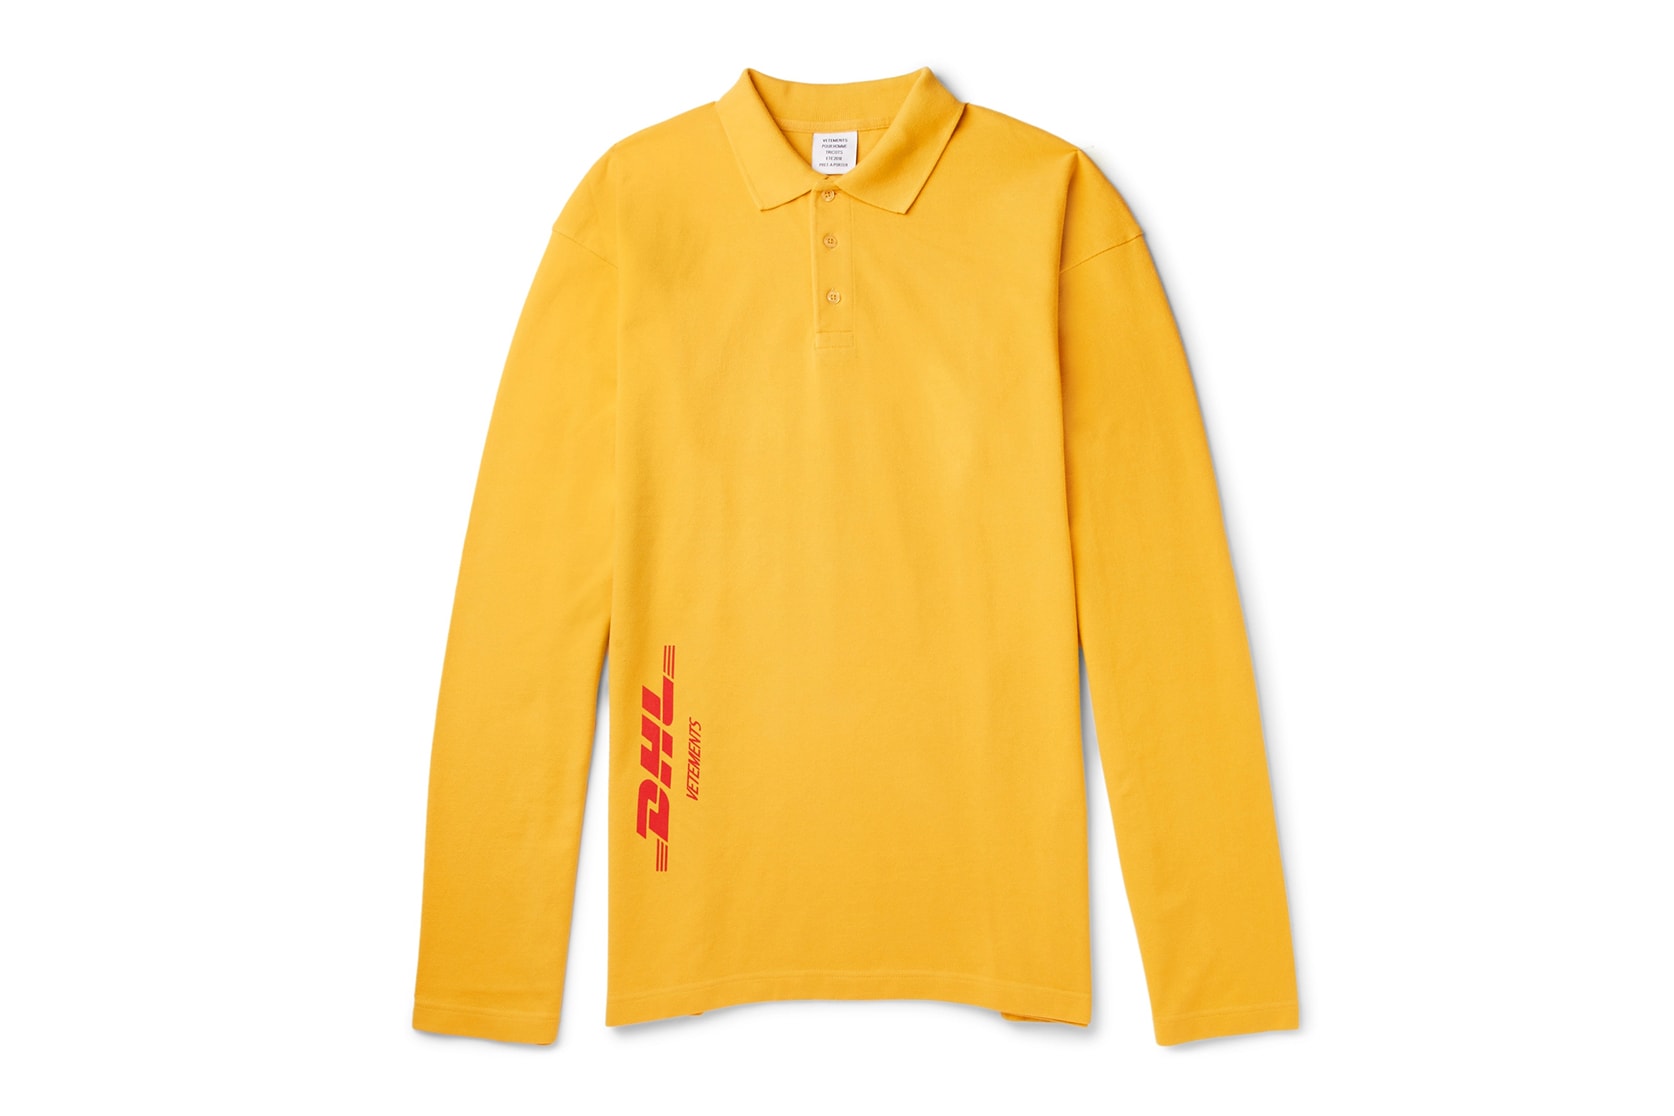 Vetements x DHL 2018 Spring/Summer 2018 Items Available Purchase SS18